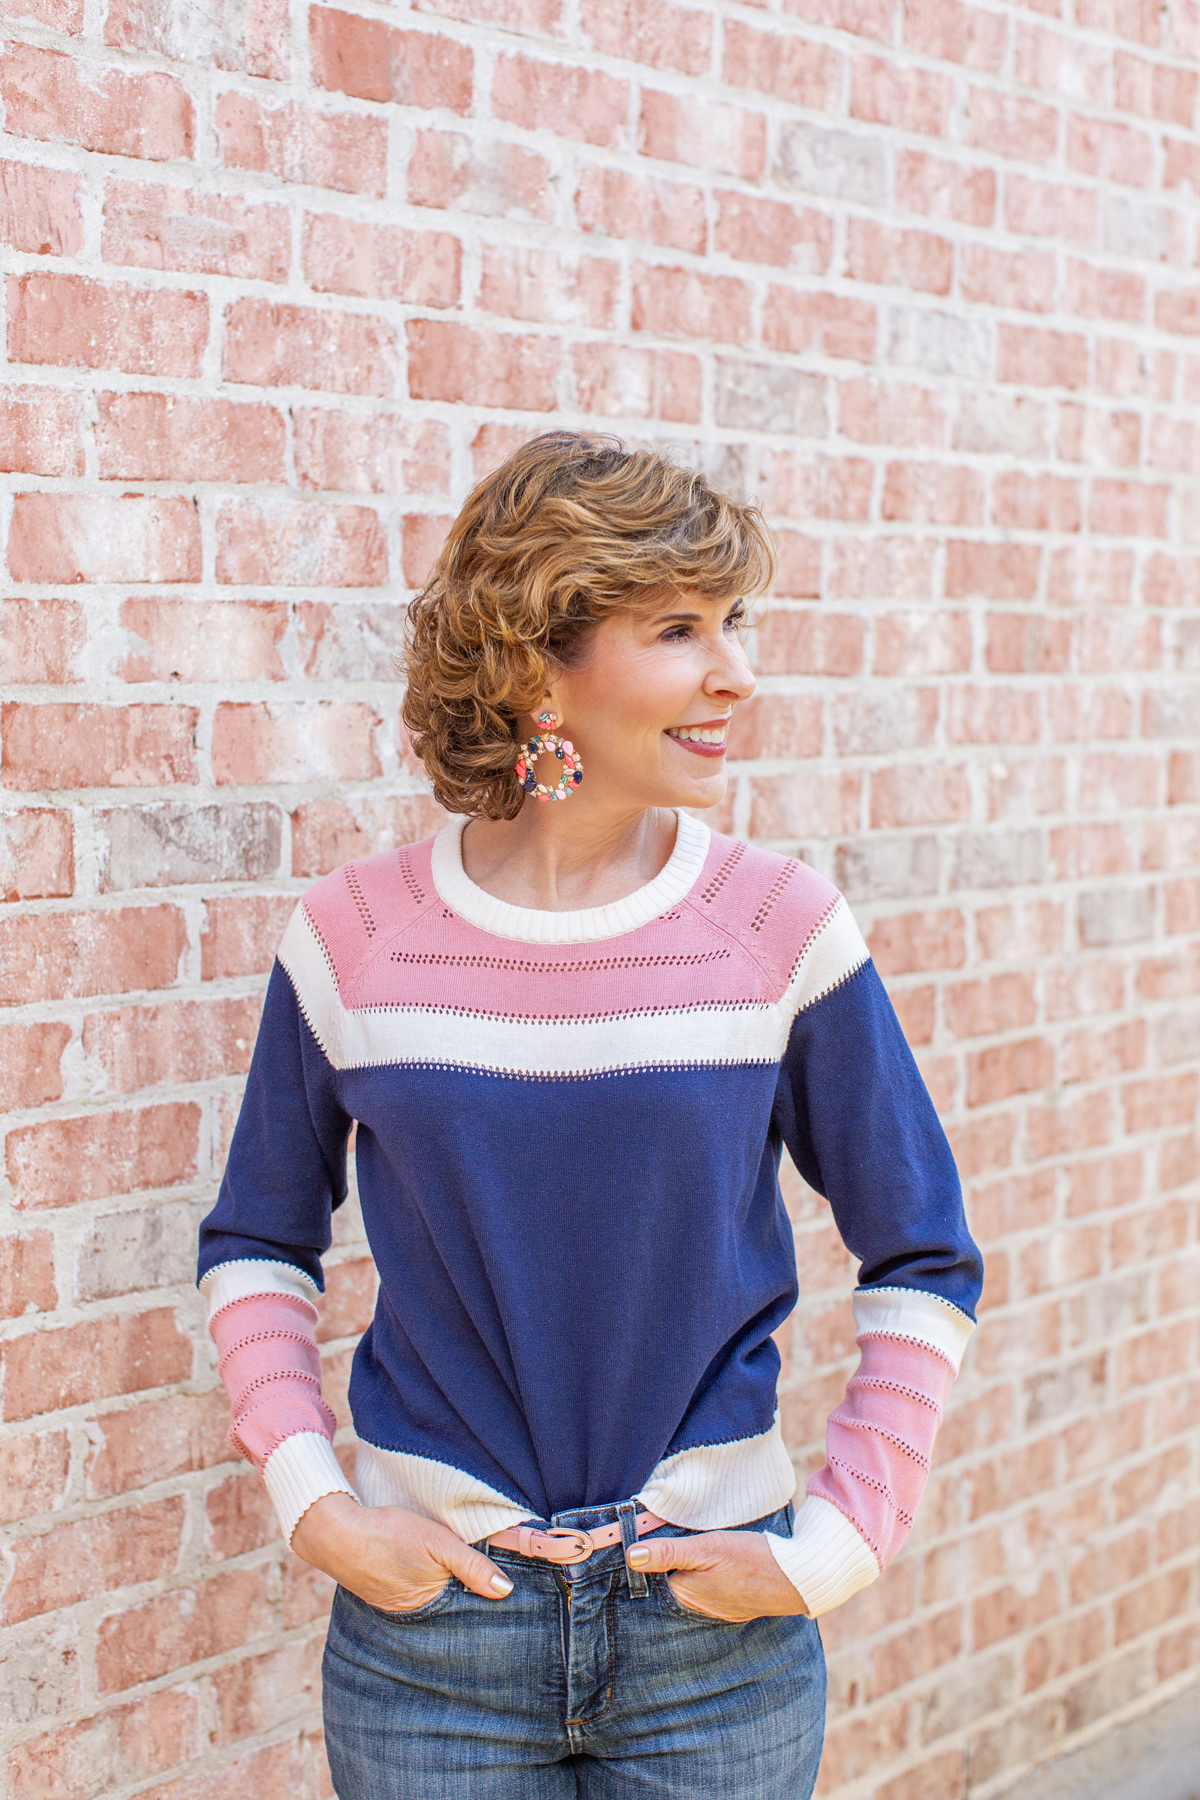 woman wearing blue and pink sweater and jeans leaning against a brick wall